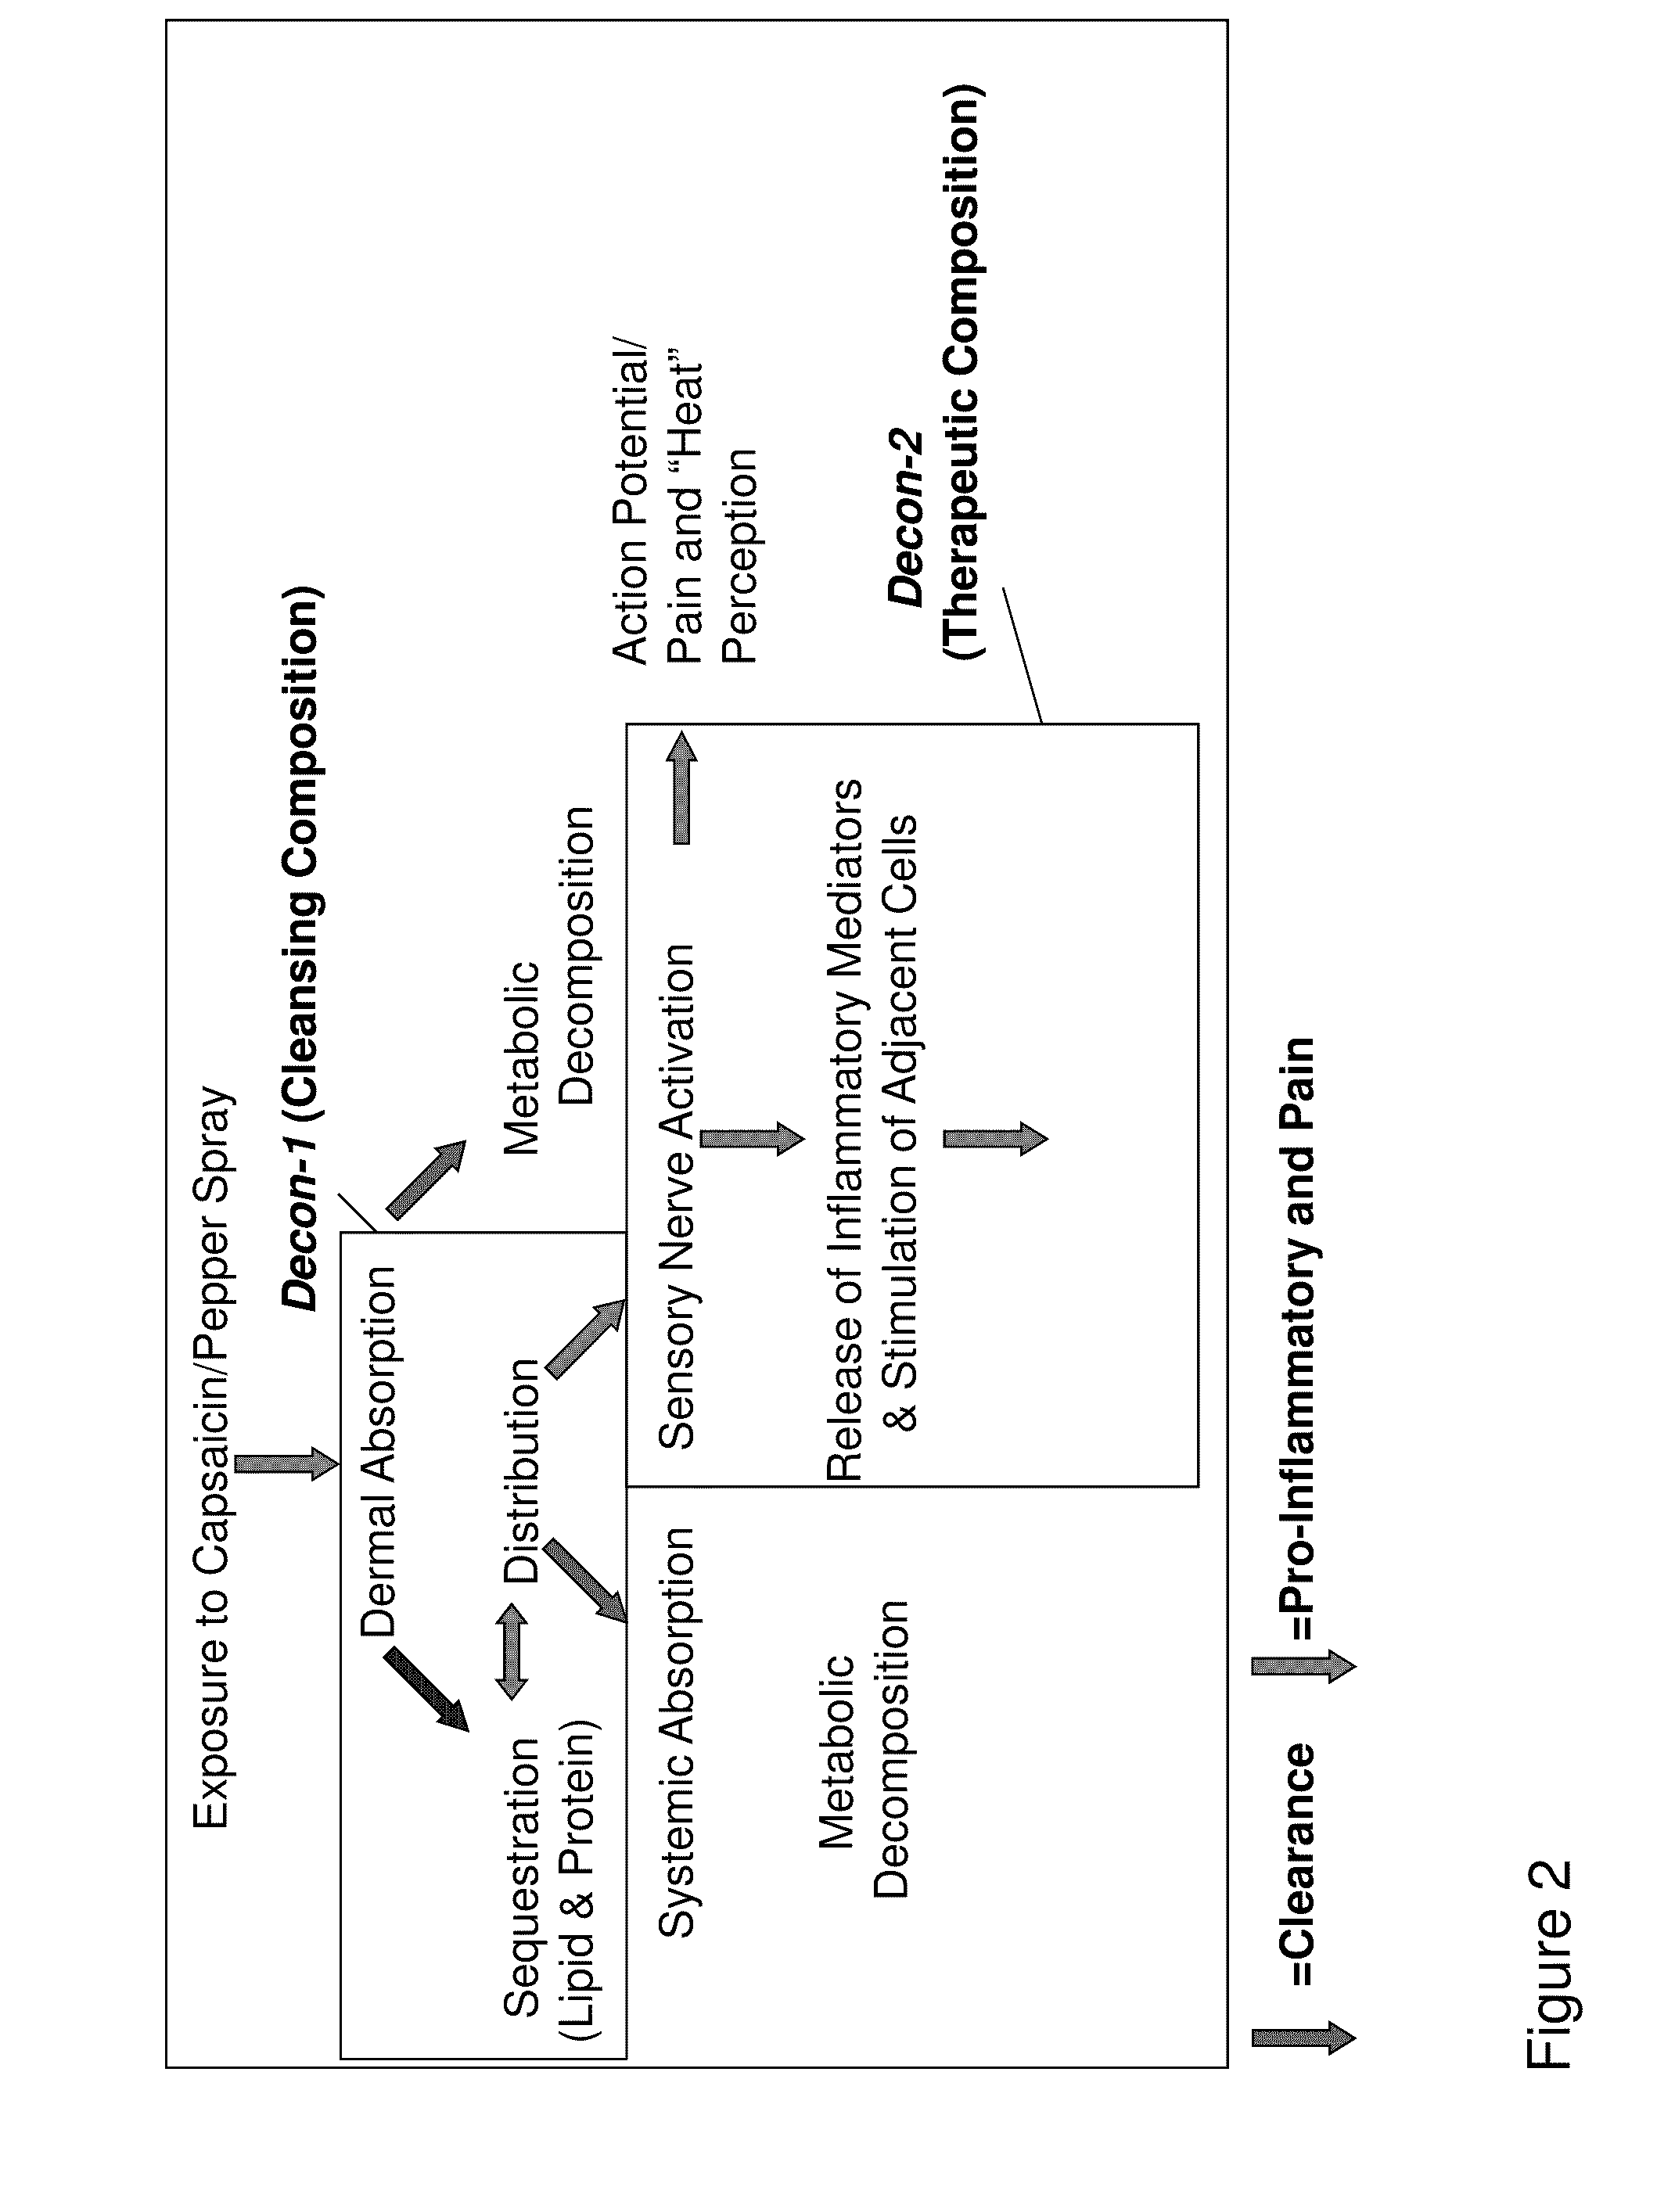 Capsaicinoid decontamination compositions and methods of use